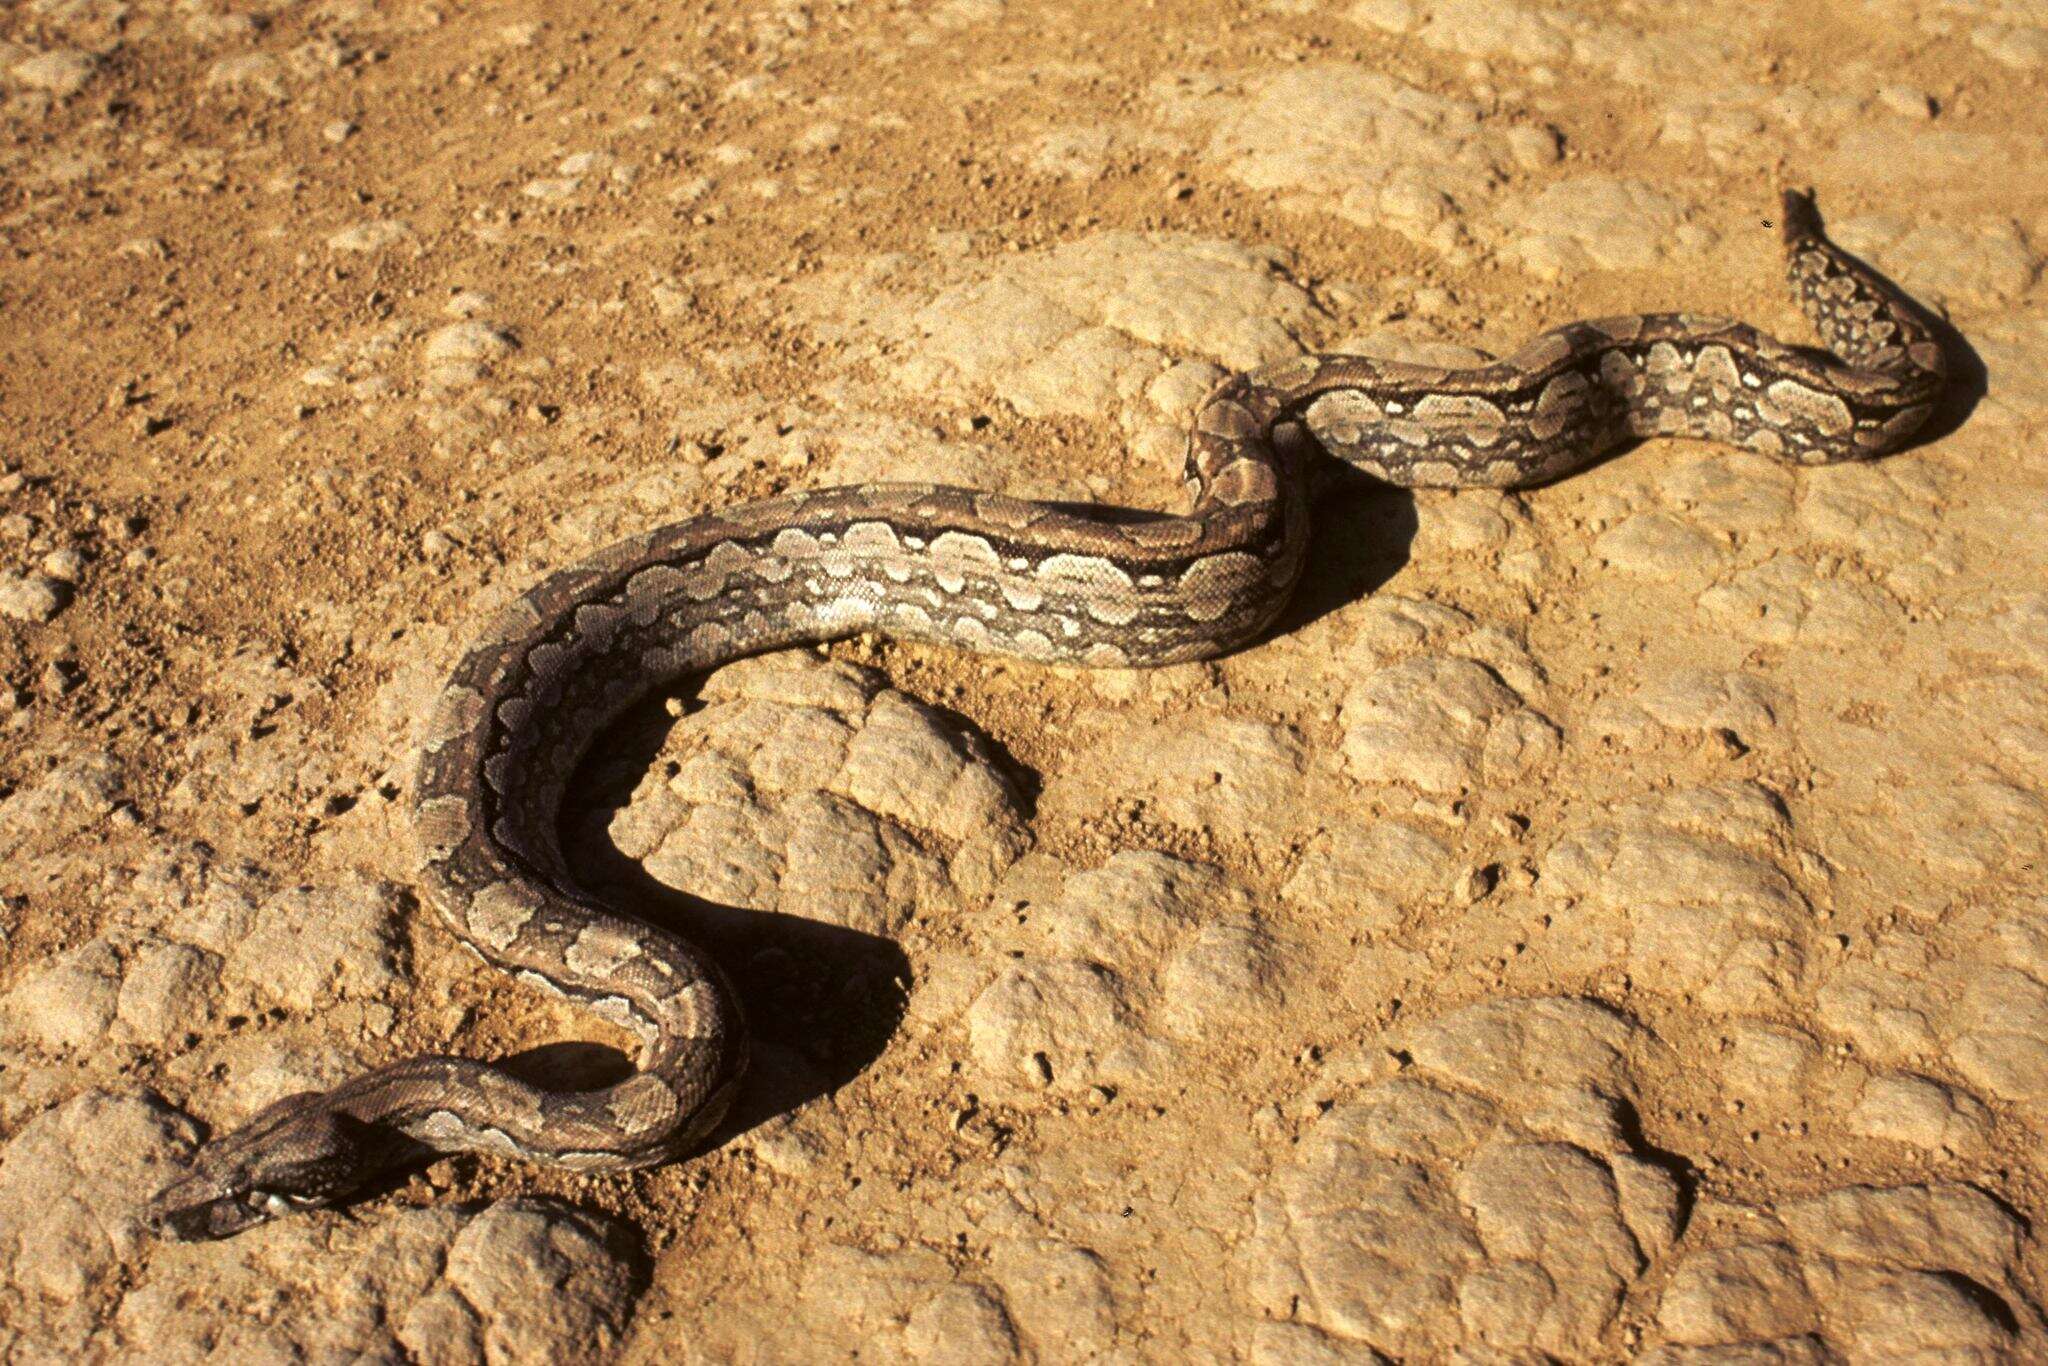 Image of Argentine Boa Constrictor